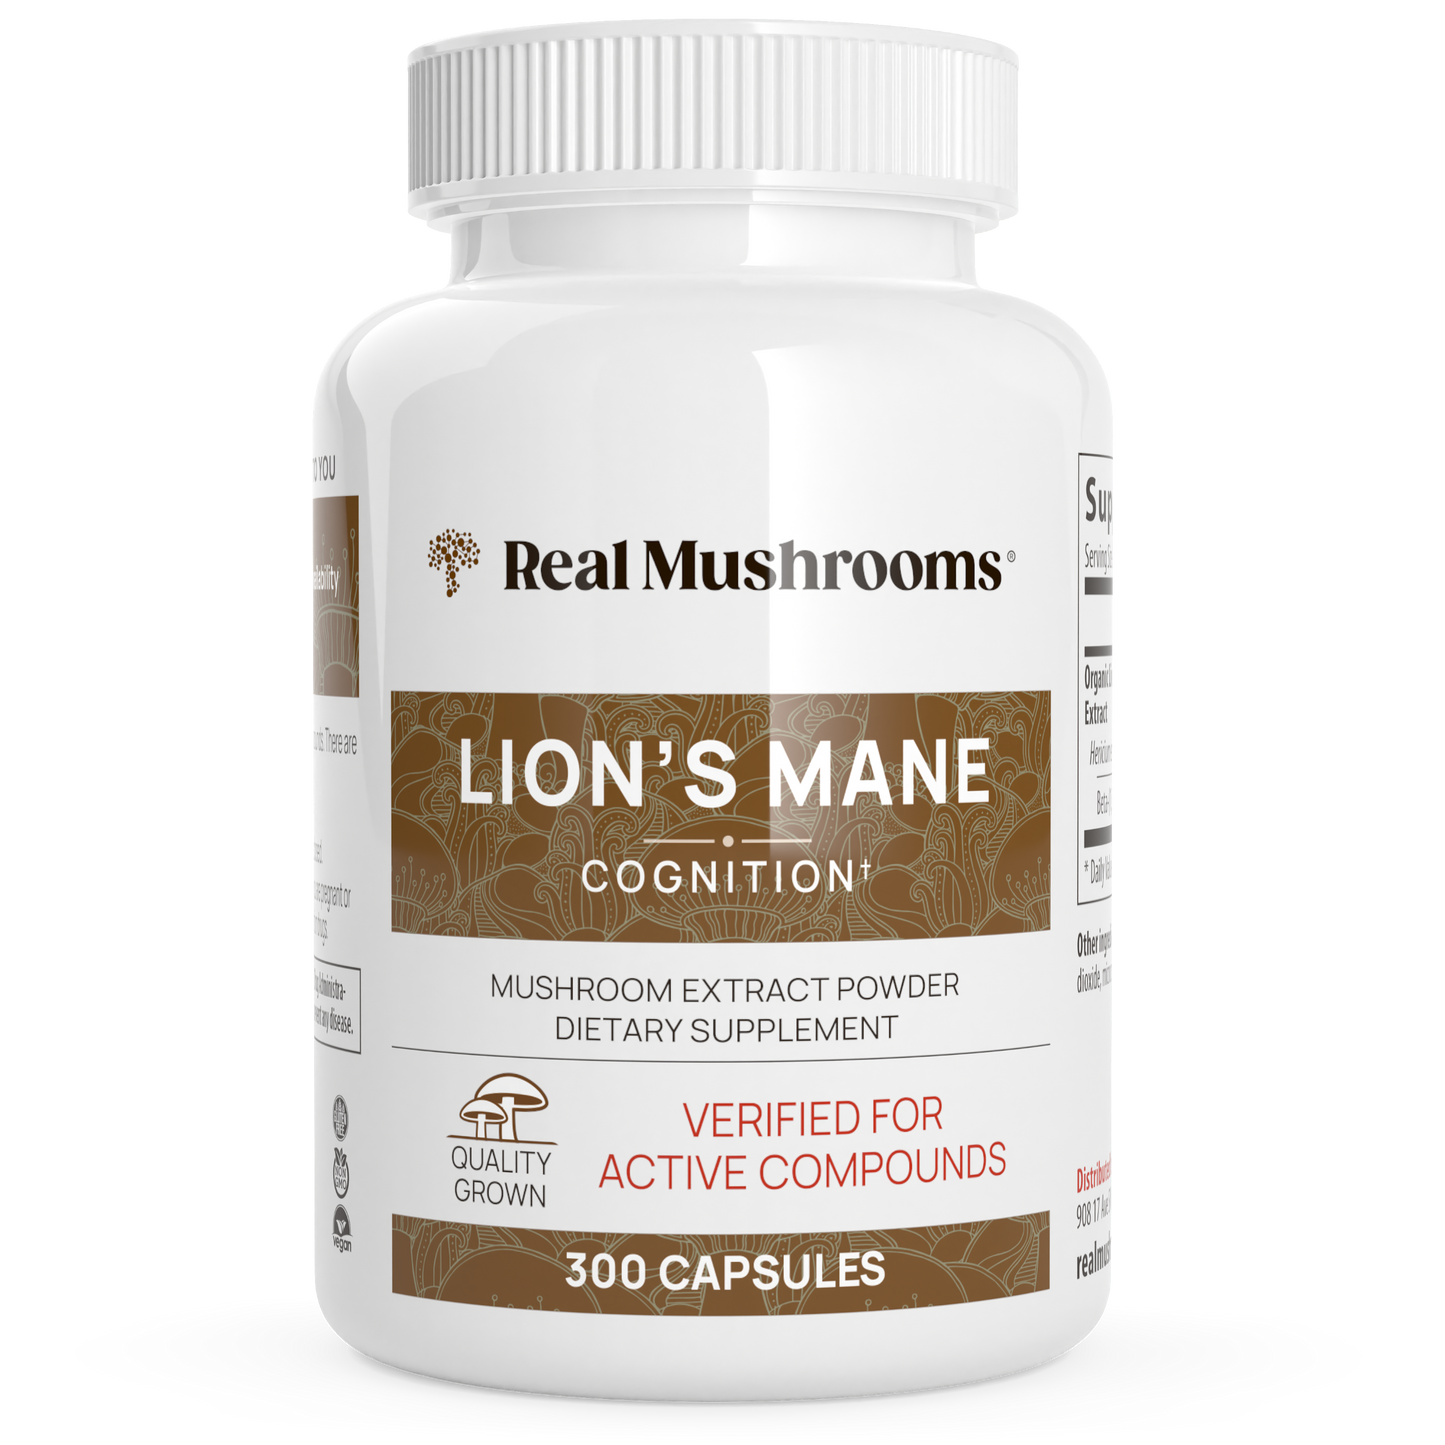 Organic Lions Mane Extract Capsules by Real Mushrooms